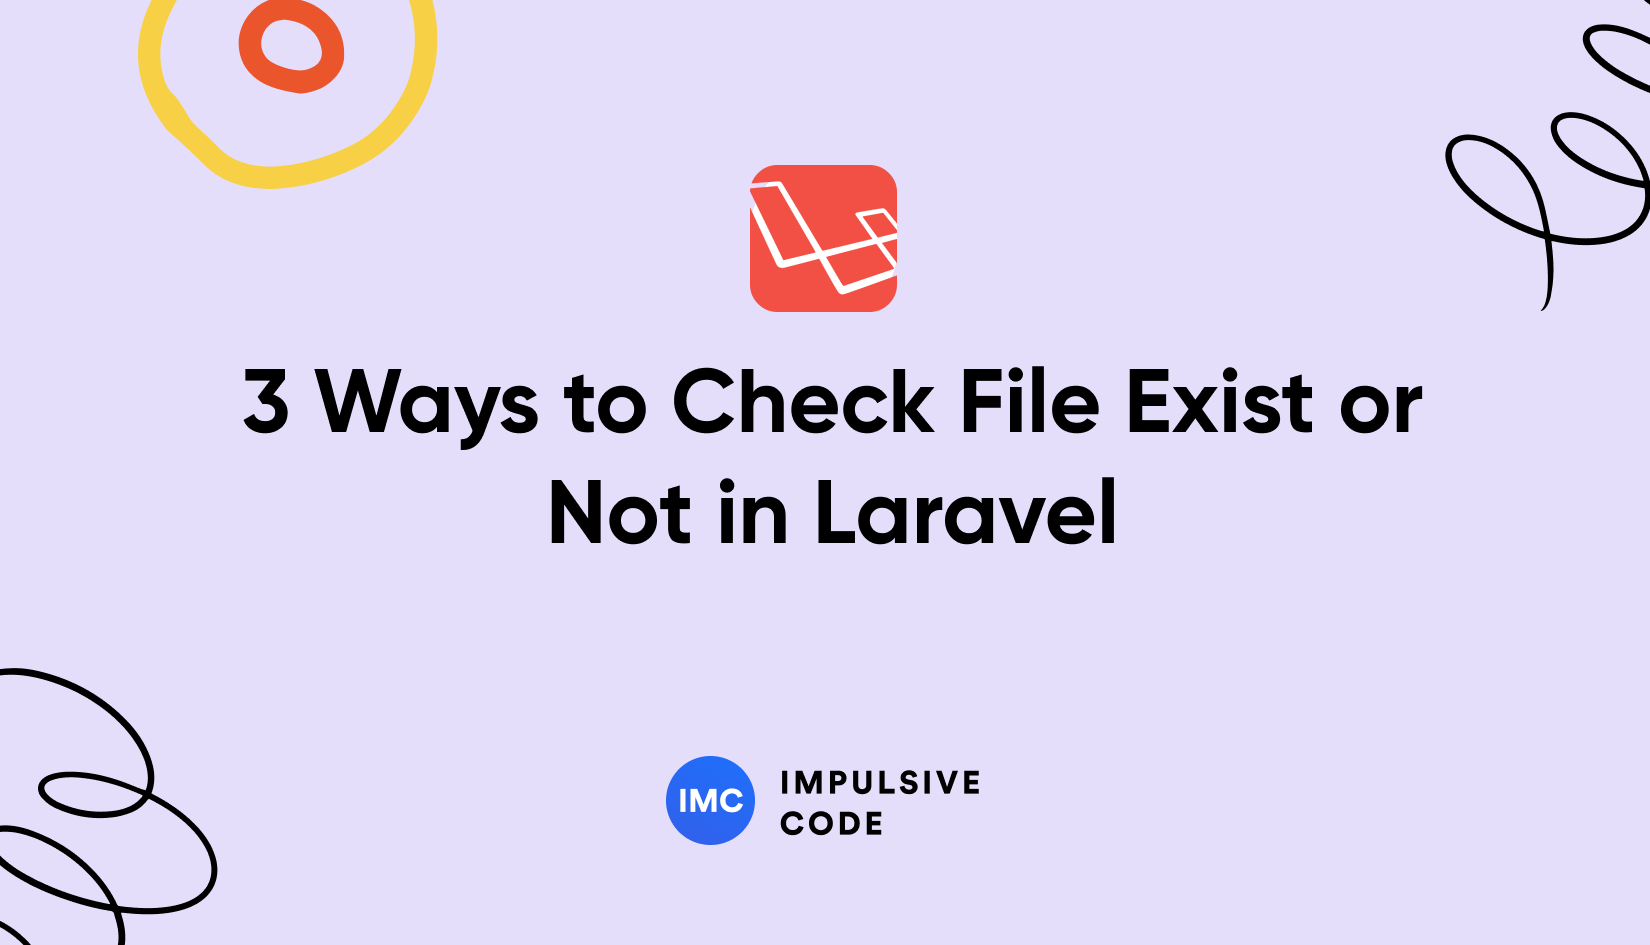 3 Ways to Check File Exist or Not in Laravel – Quick Guide